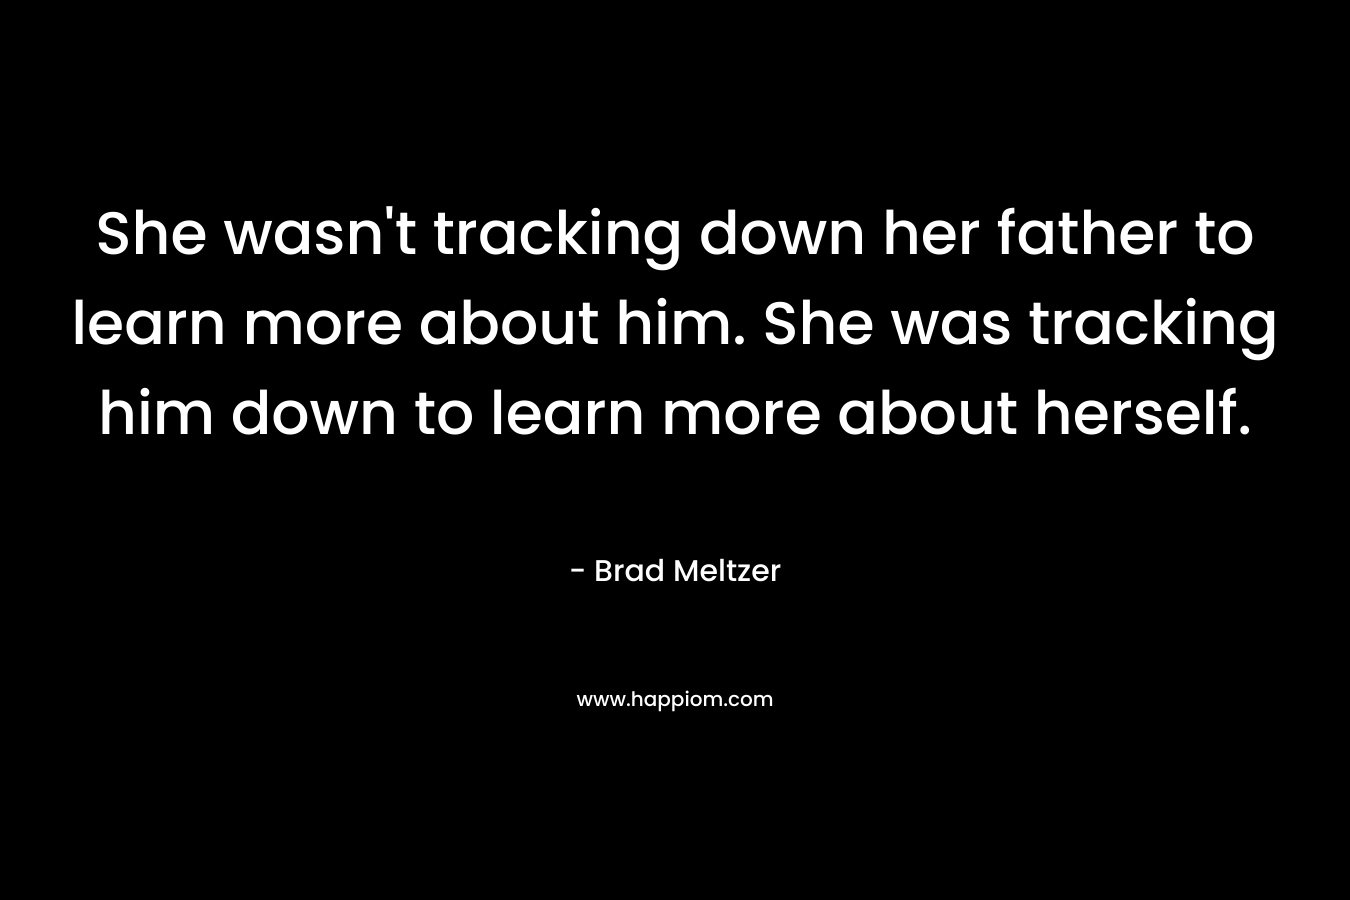 She wasn't tracking down her father to learn more about him. She was tracking him down to learn more about herself.